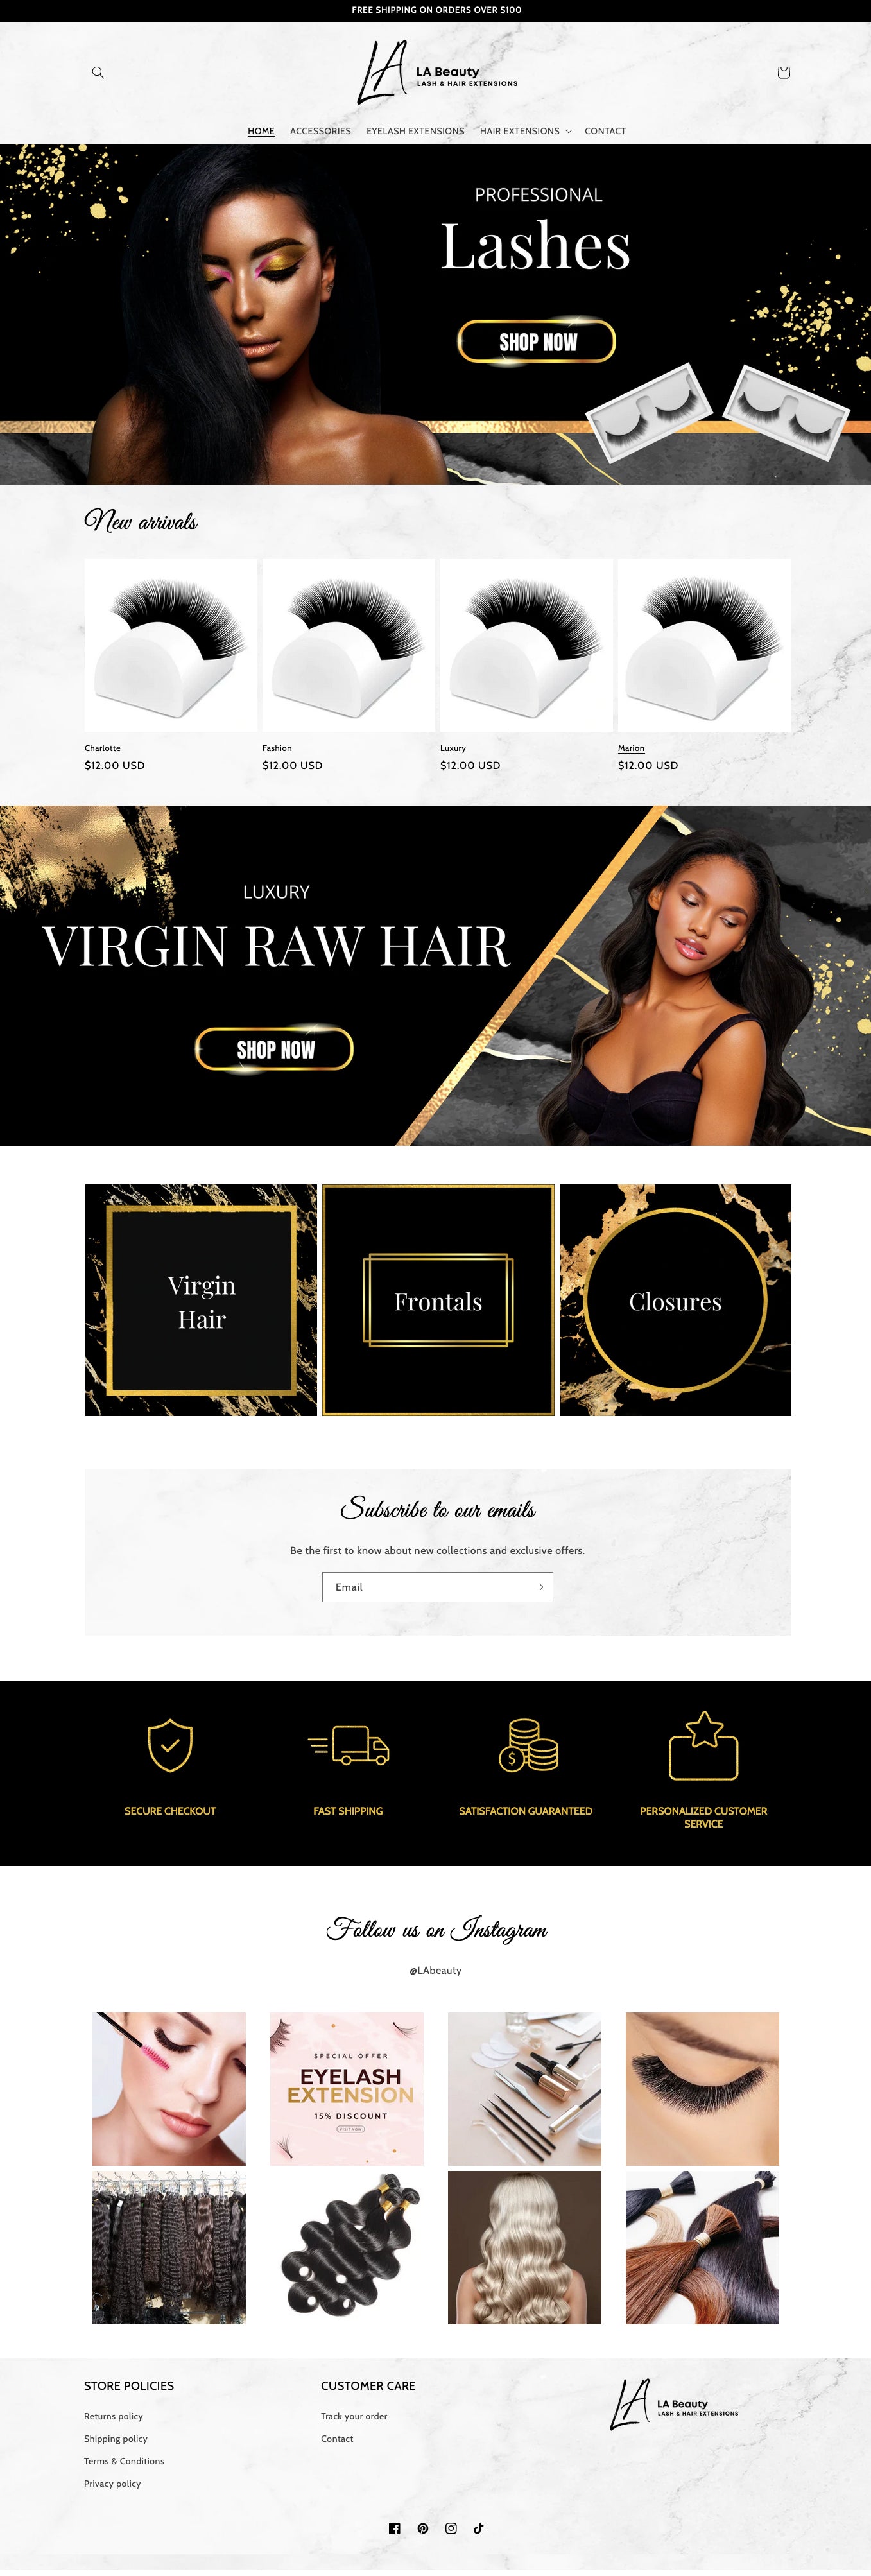 Hair and lash extensions website